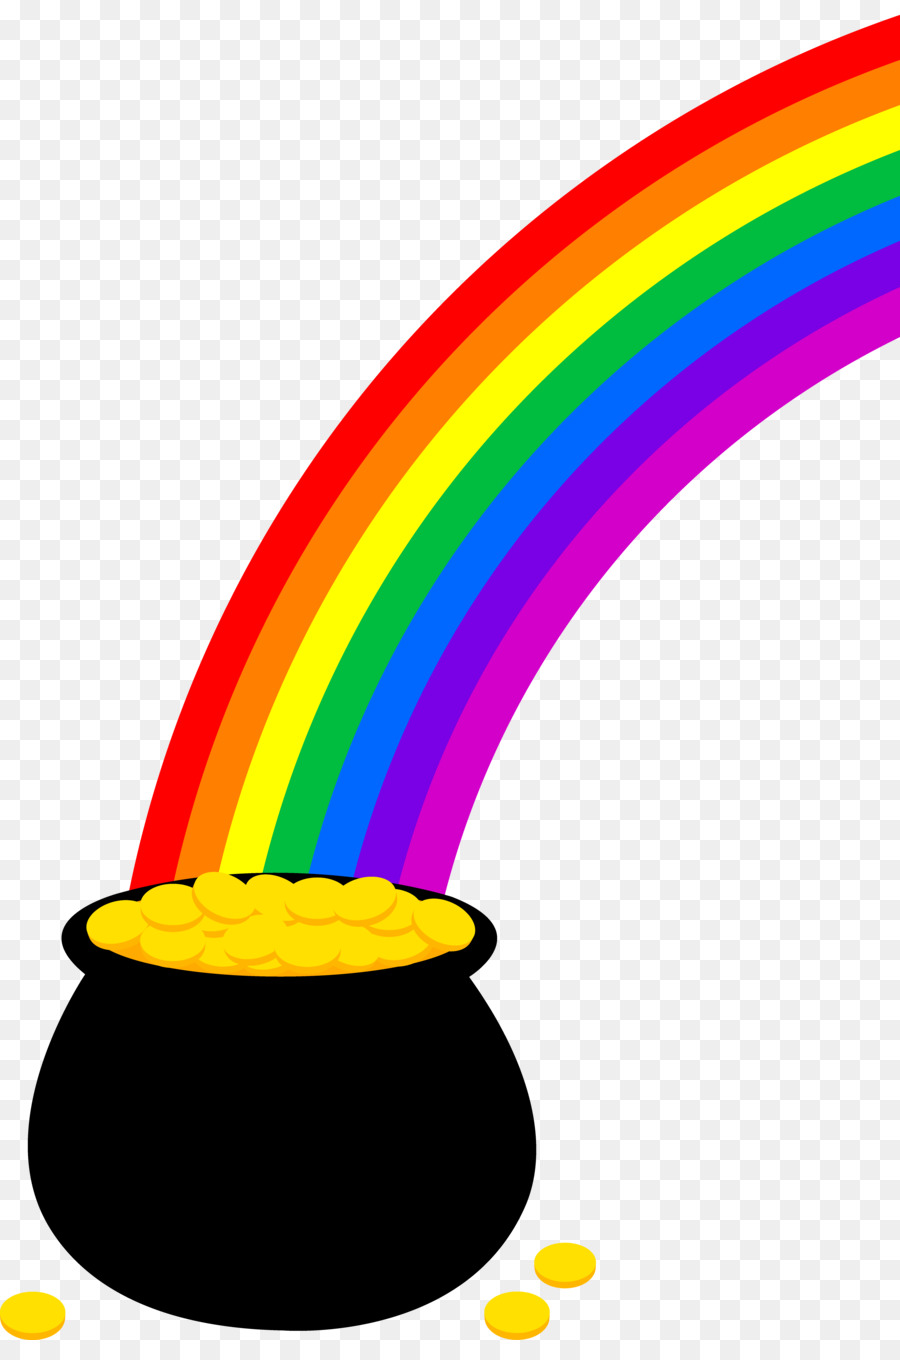 Rainbow Pot of Gold Clip art - Free Rainbow Clipart png download - 6465*9629 - Free Transparent Rainbow png Download.